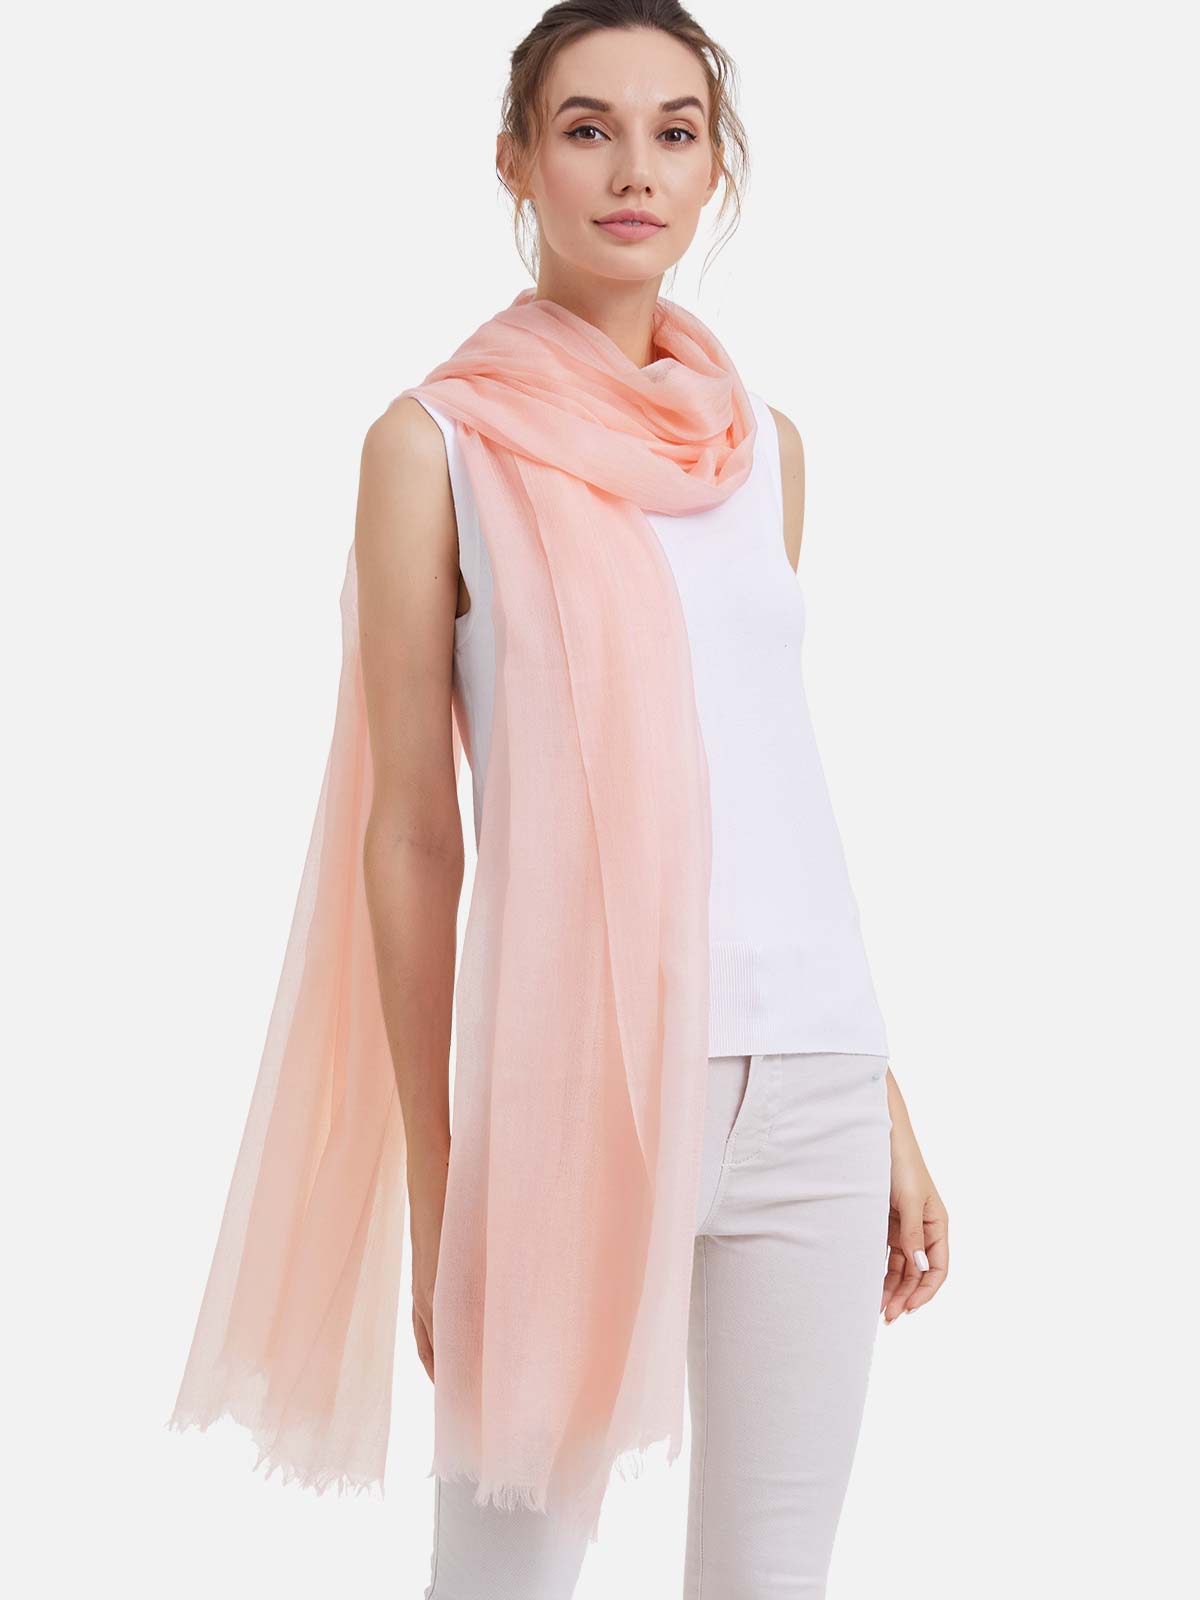 Featherlight Pink Cashmere Scarf